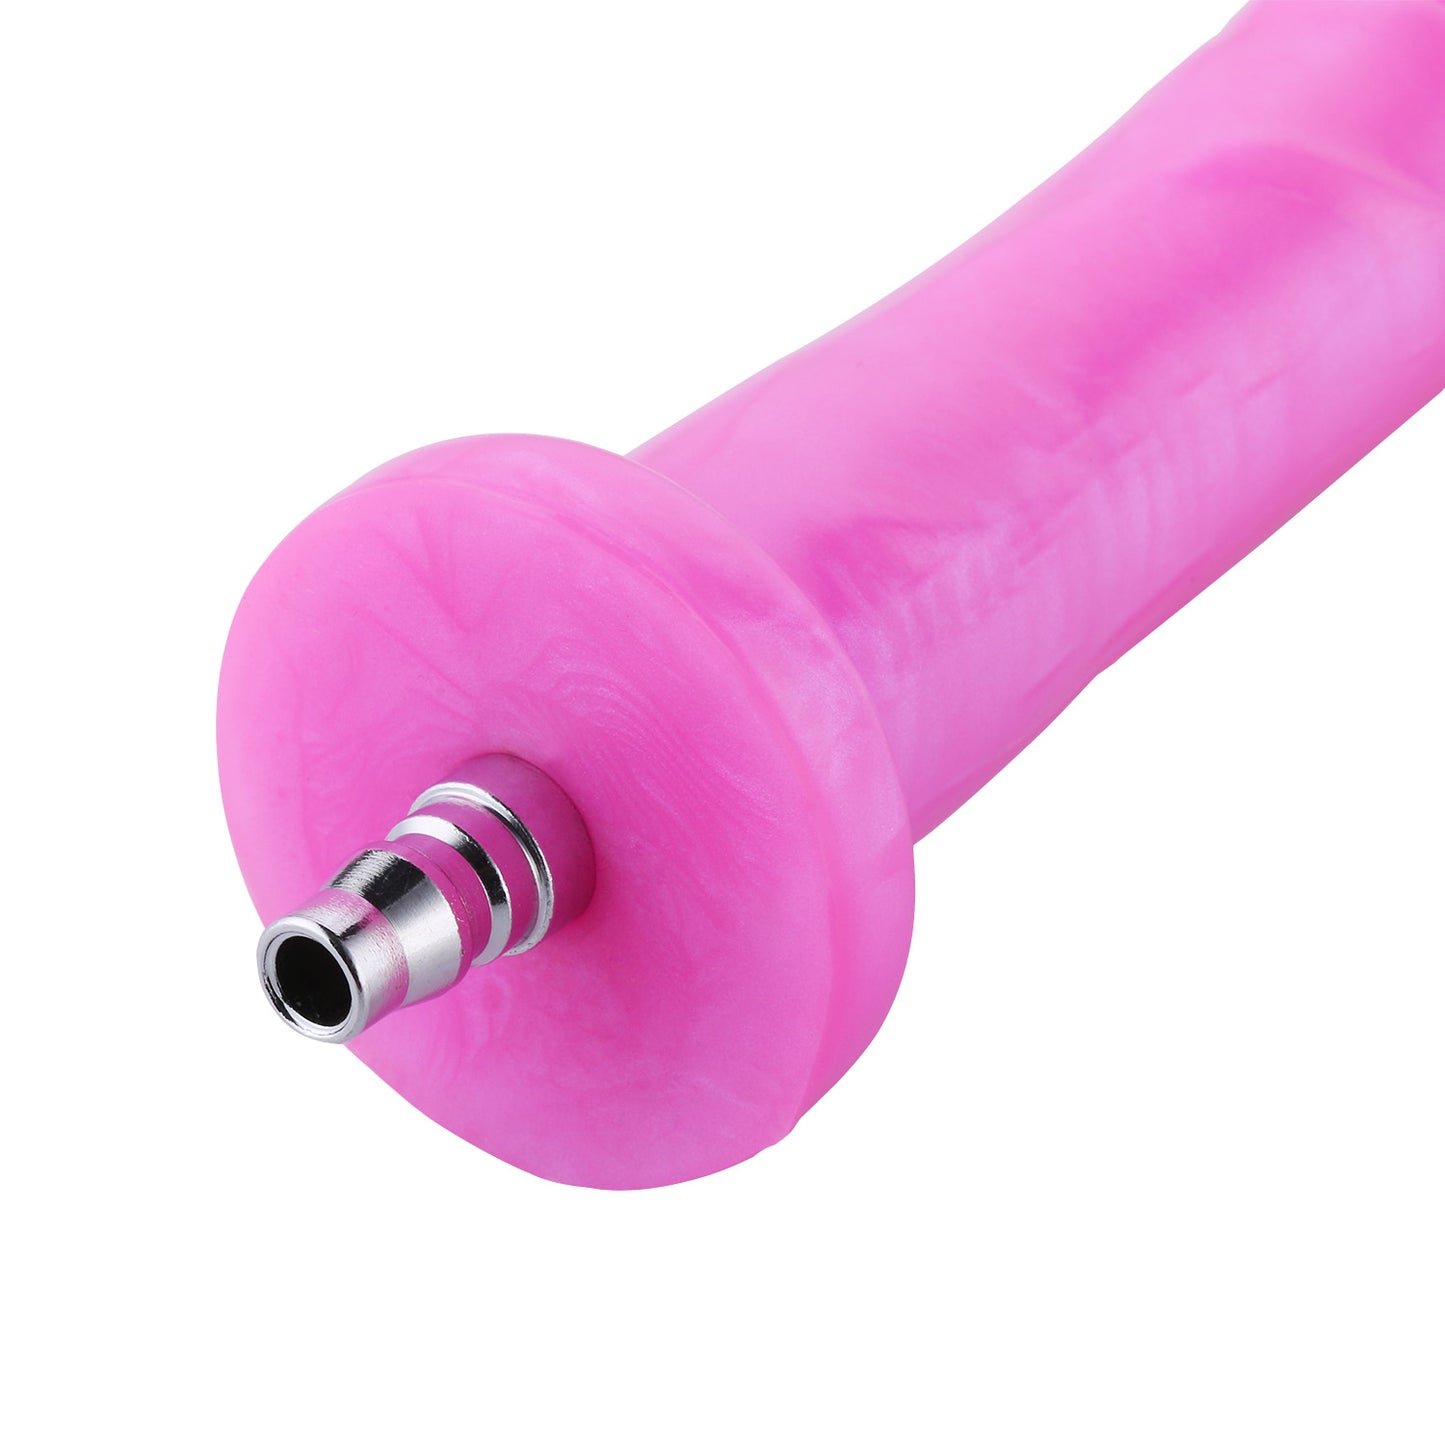 Hismith Premium Anal Medical Silicone Dildo Pink with Quick Air Connector